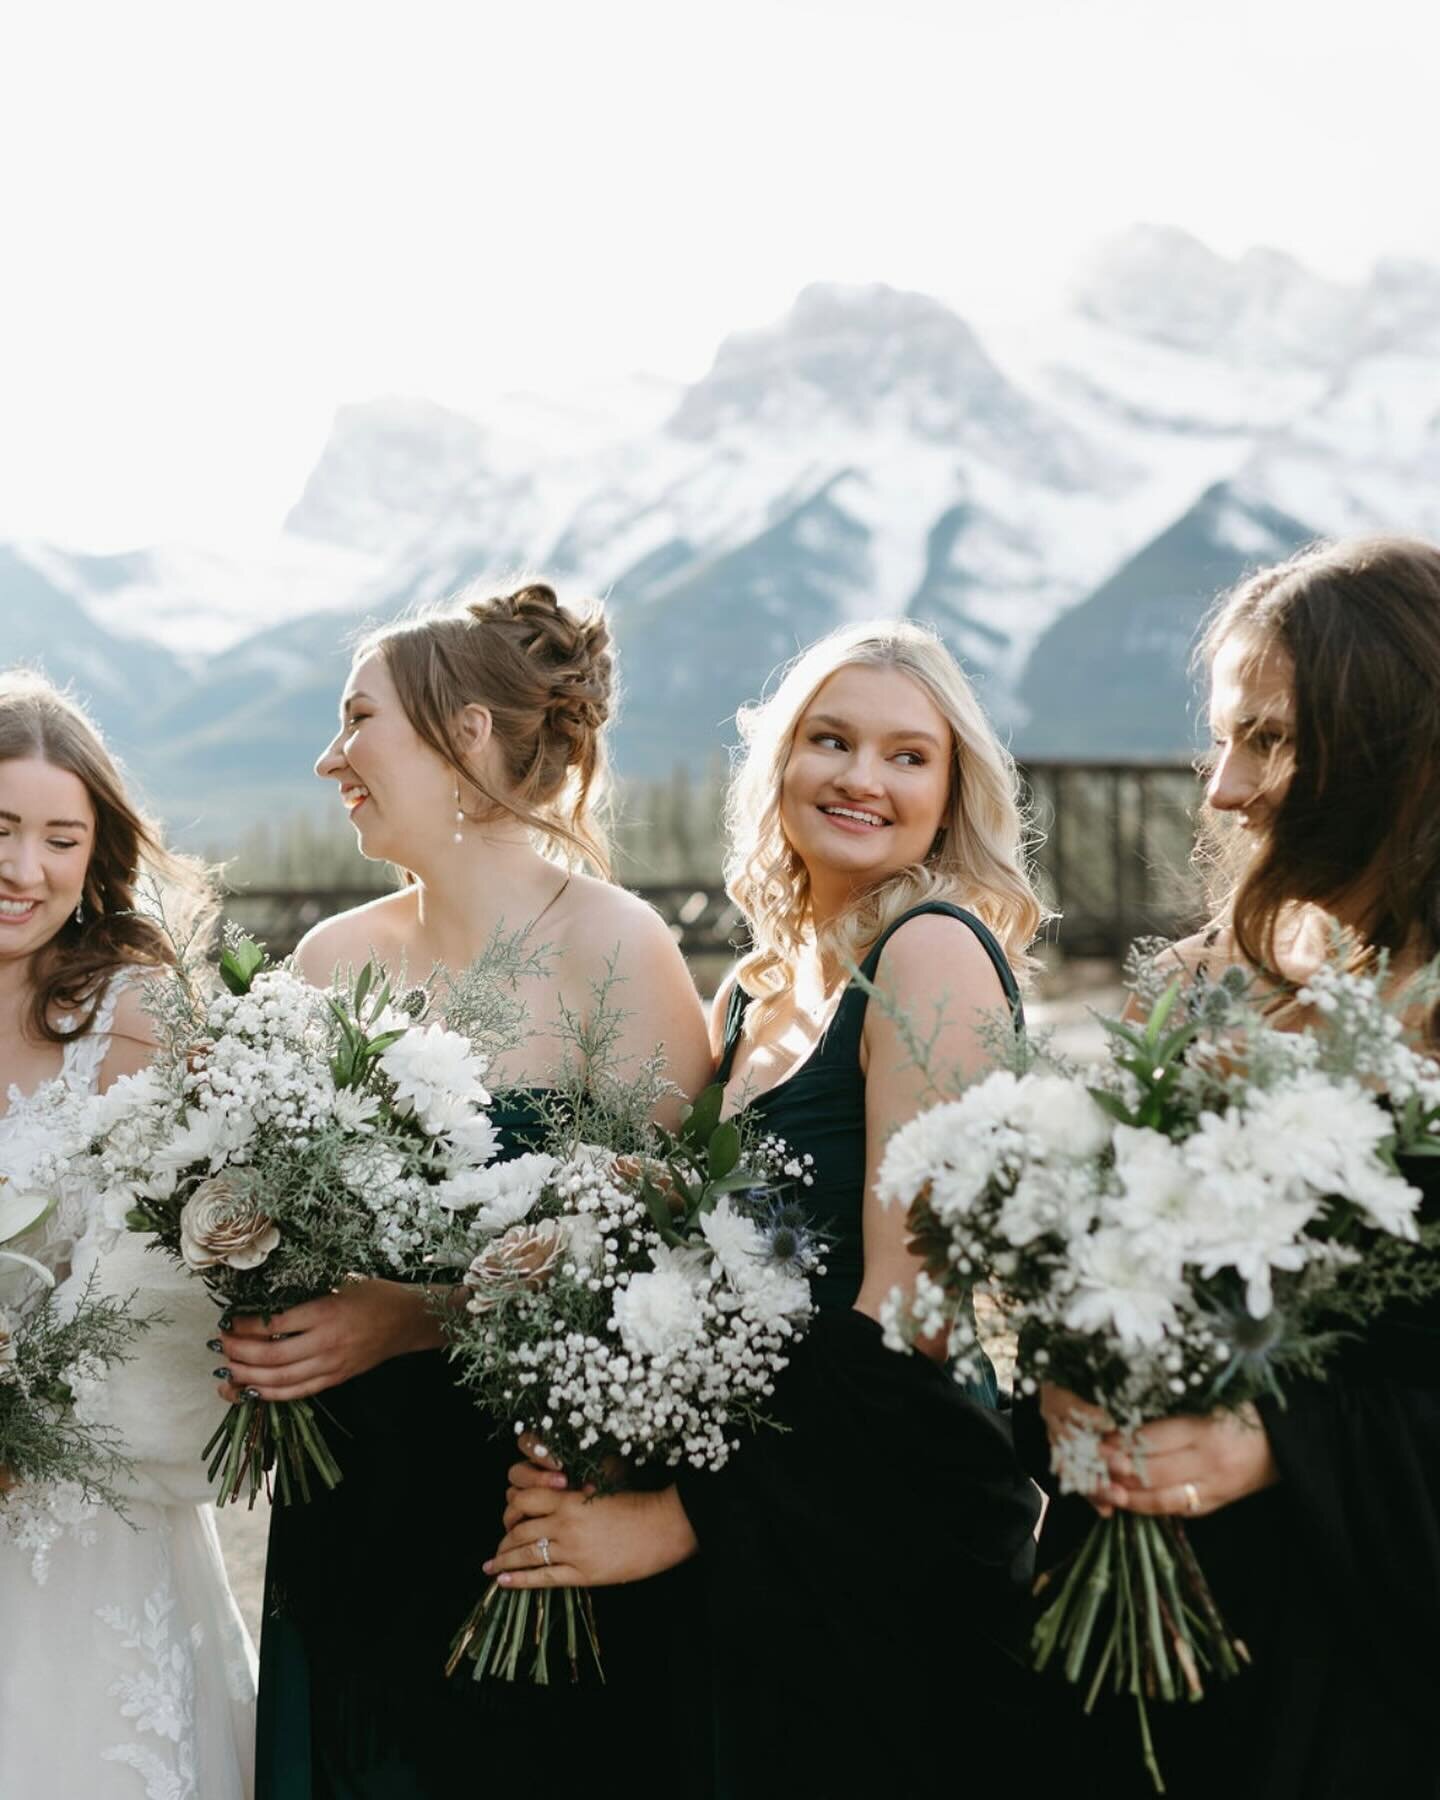 BRIDESMAID // noun. A woman who is like a sister; best friend; someone a bride&rsquo;s big day would be incomplete without 🖤 - Primpmeup via @pinterest

#lovestoryteller #lovestoryphoto #nikoncanada #albertaweddingphotographer #yycweddingphotographe